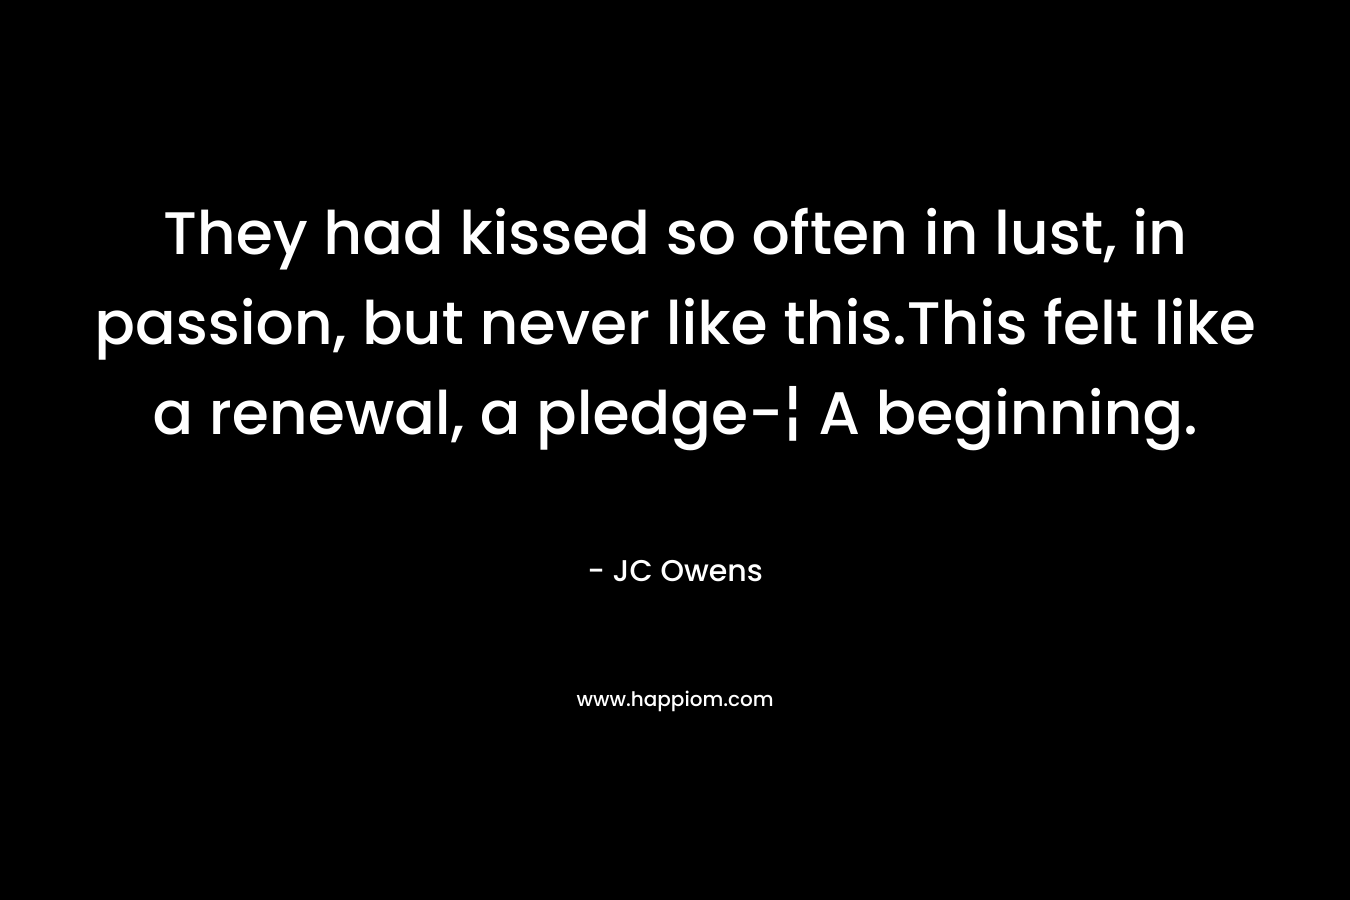 They had kissed so often in lust, in passion, but never like this.This felt like a renewal, a pledge-¦ A beginning.